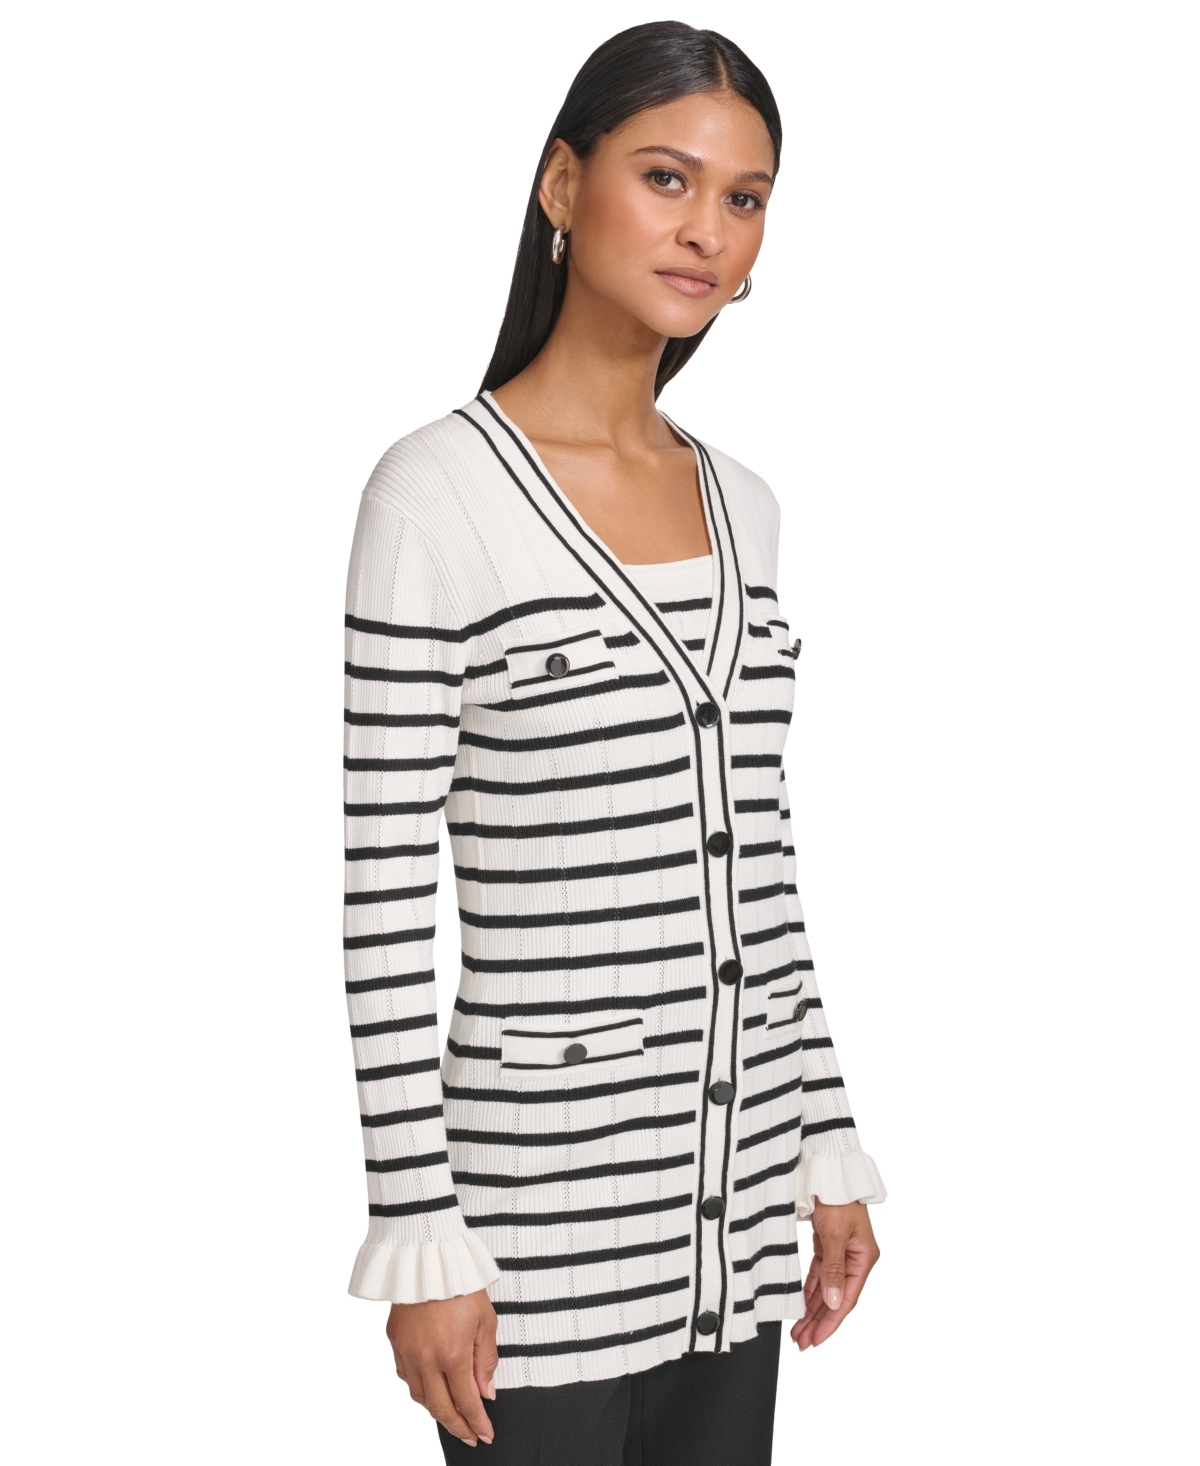 Women's Button-Front Long-Sleeve Cardigan - Sft Wt/blk